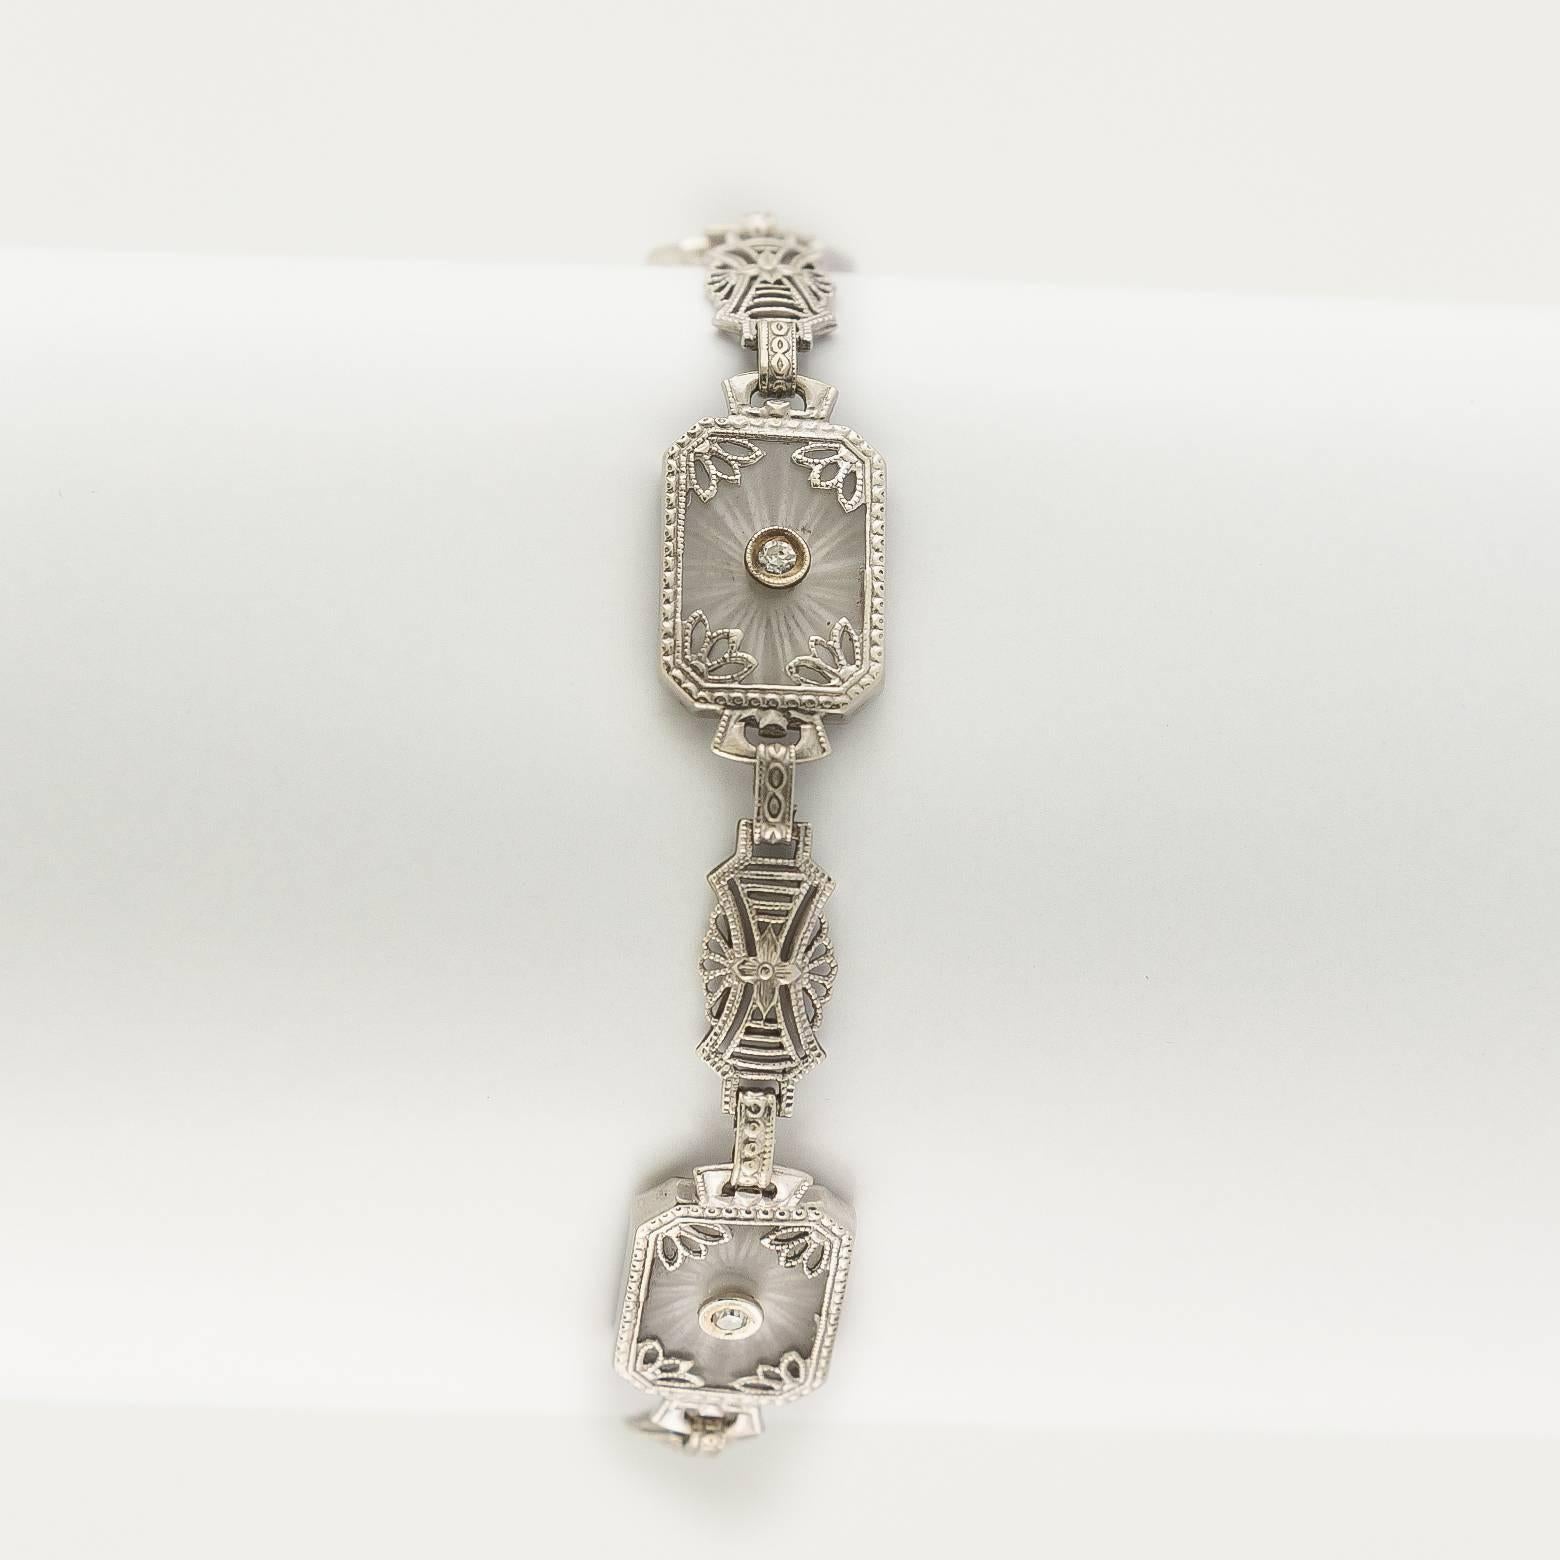 This stunning bracelet is reminiscent of the Roaring 20's. The classic style incorporates diamonds, white gold and clear crystal that is etched with a motif that looks like the rays of the sun. The delicate filigree gently displays the bursts of sun